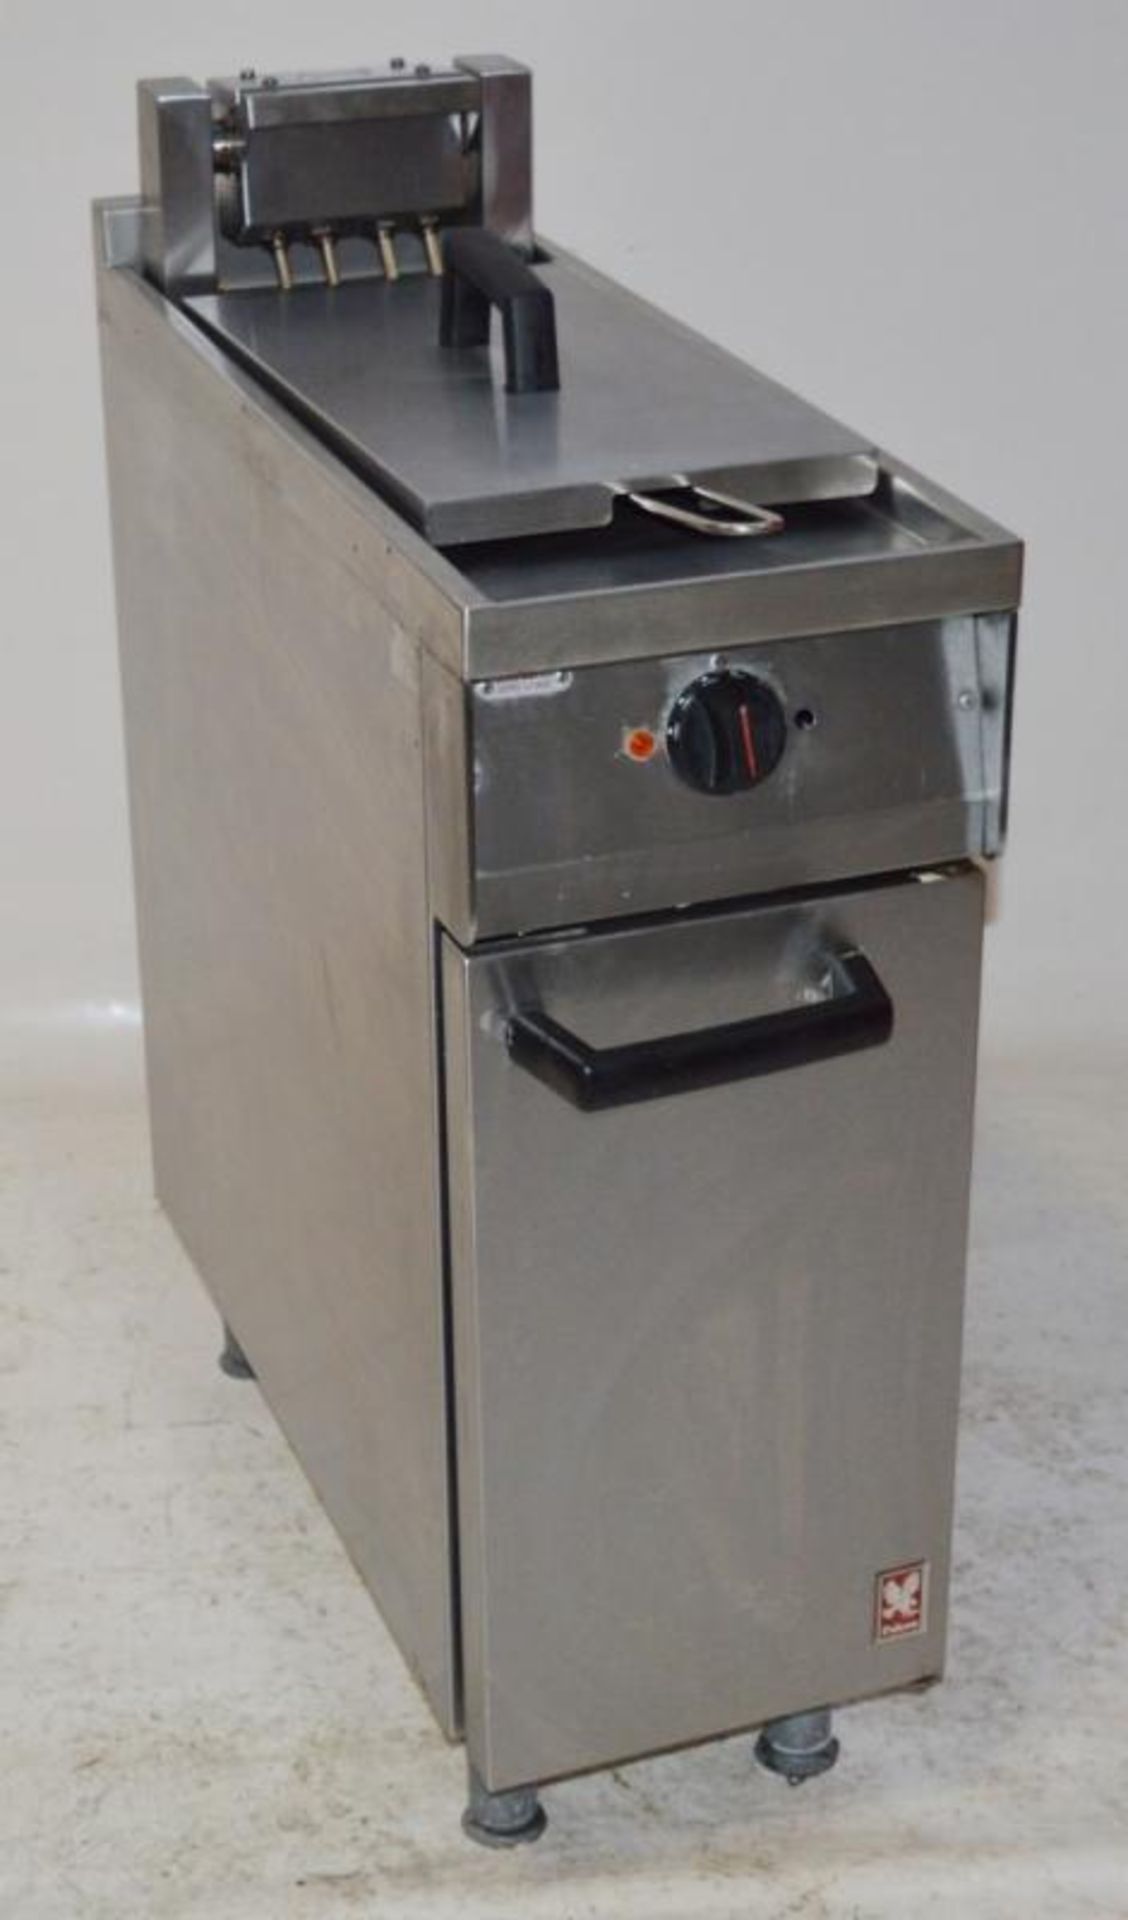 1 x Falcon Dominator E1830 Electric 3 Phase Fryer Cooker - Stainless Steel - H84 x W30 x D77 cms - C - Image 8 of 13